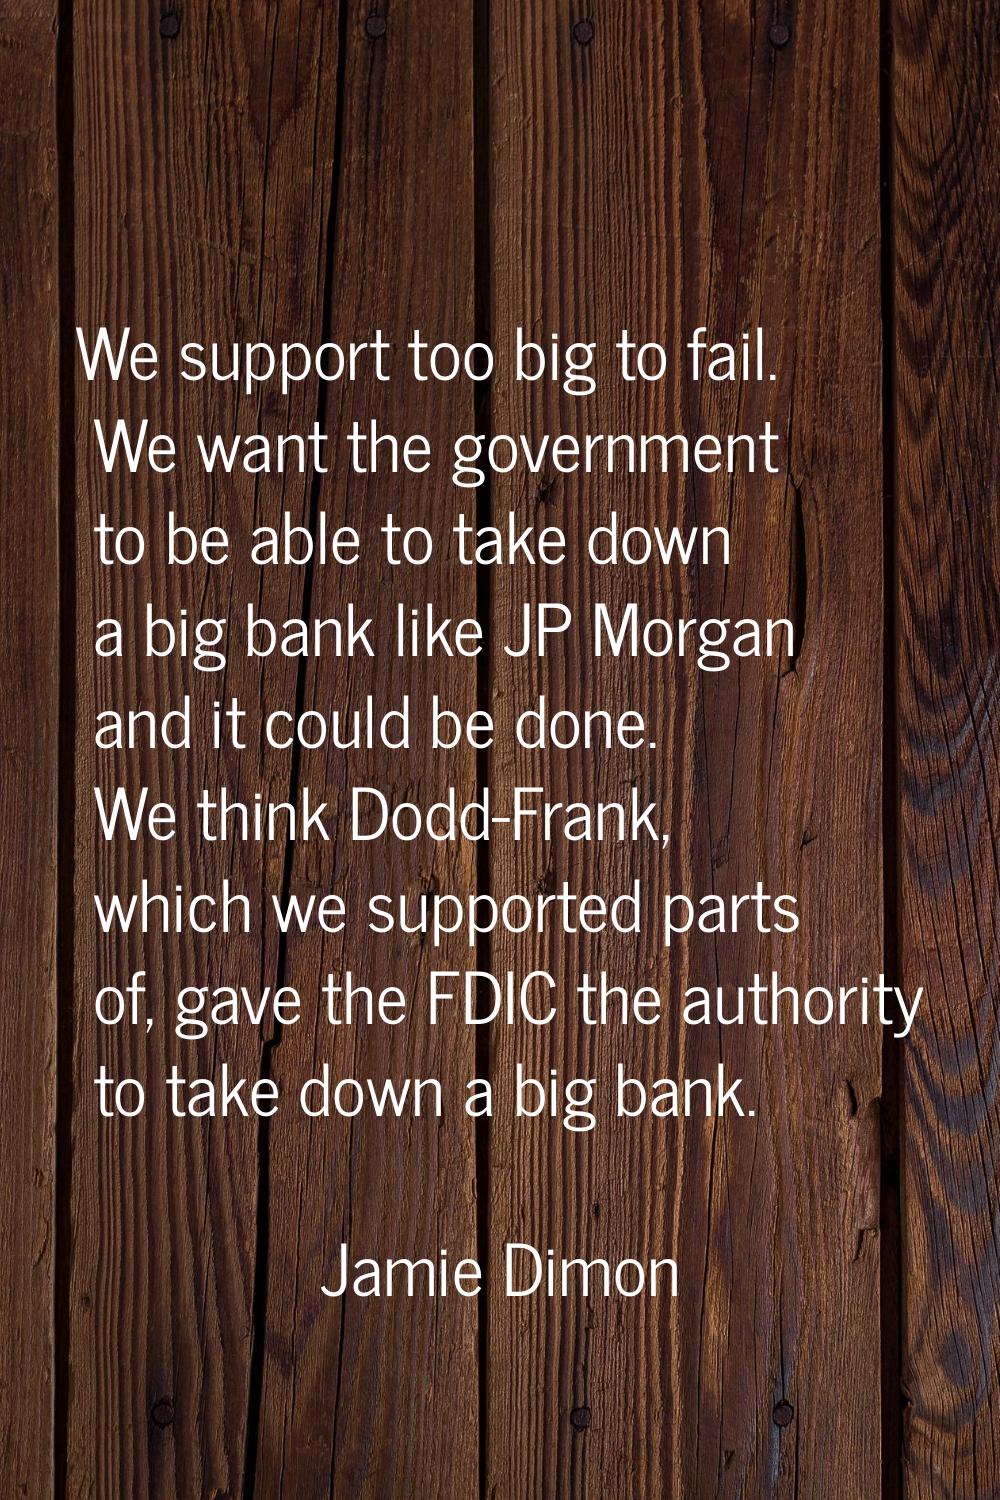 We support too big to fail. We want the government to be able to take down a big bank like JP Morga